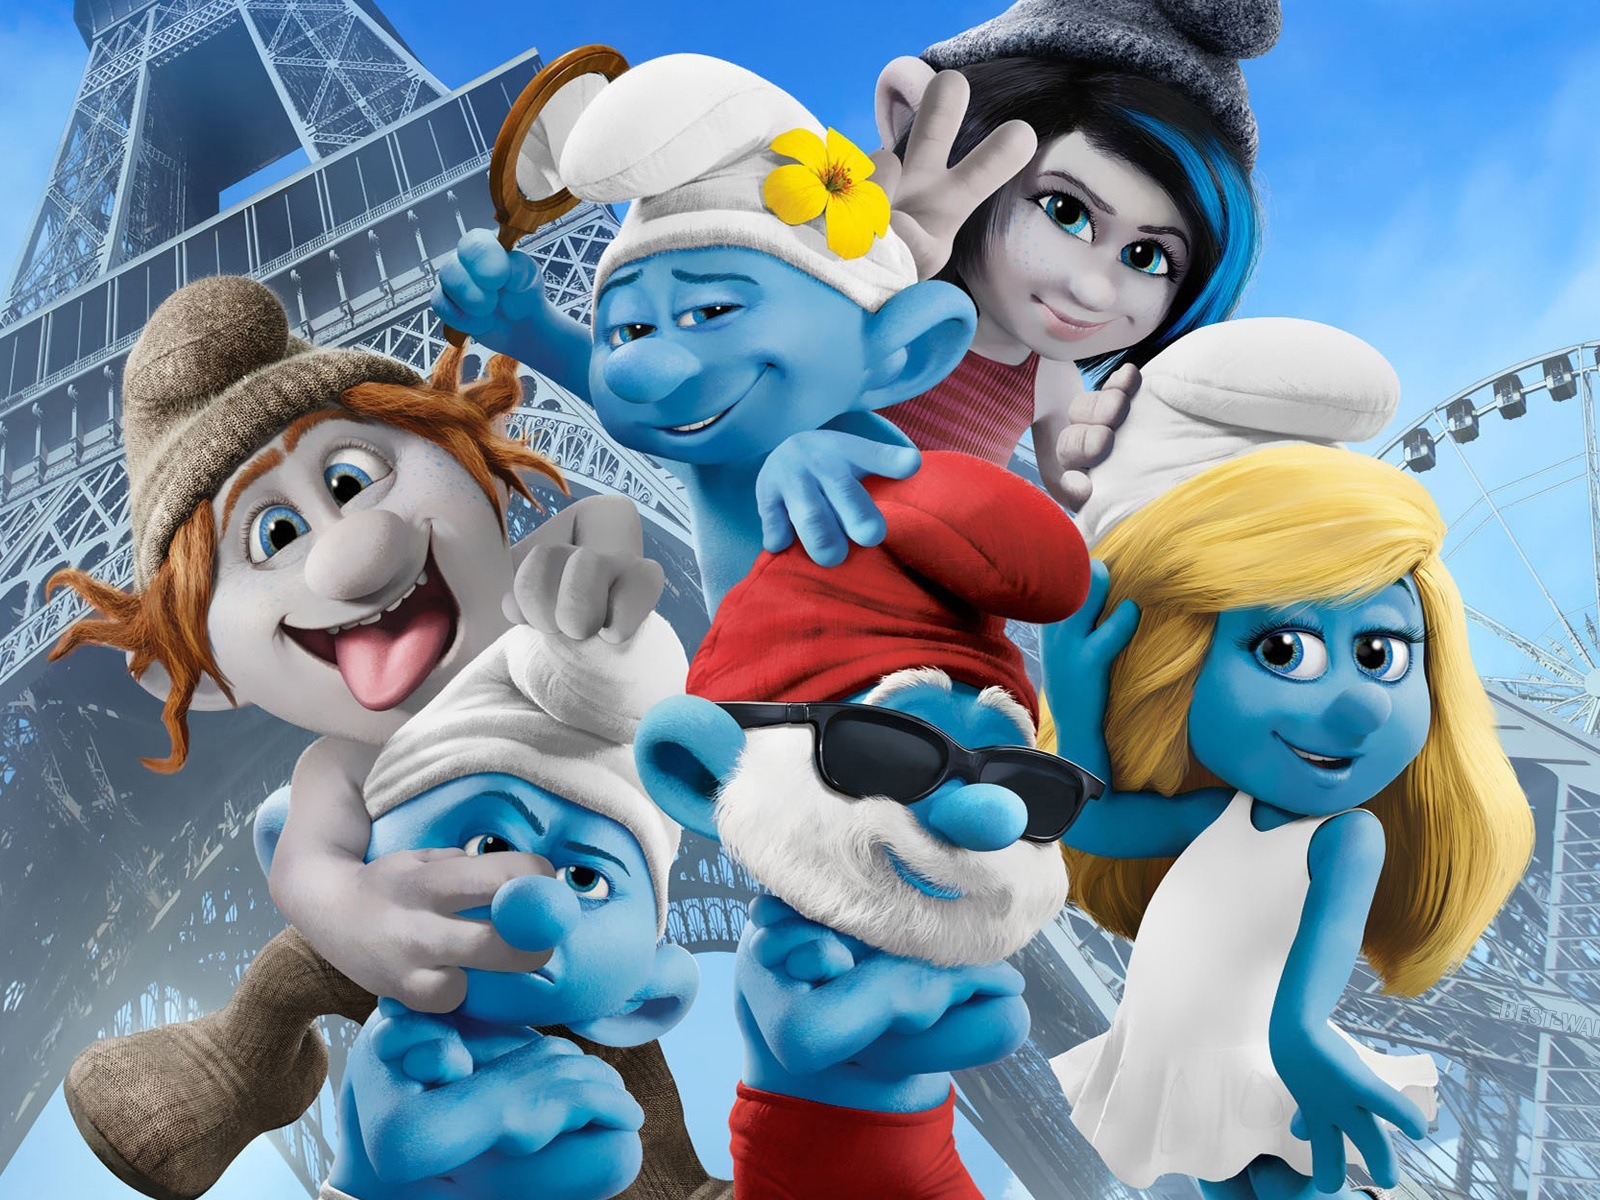 The Smurfs 2 HD movie wallpapers #7 - 1600x1200